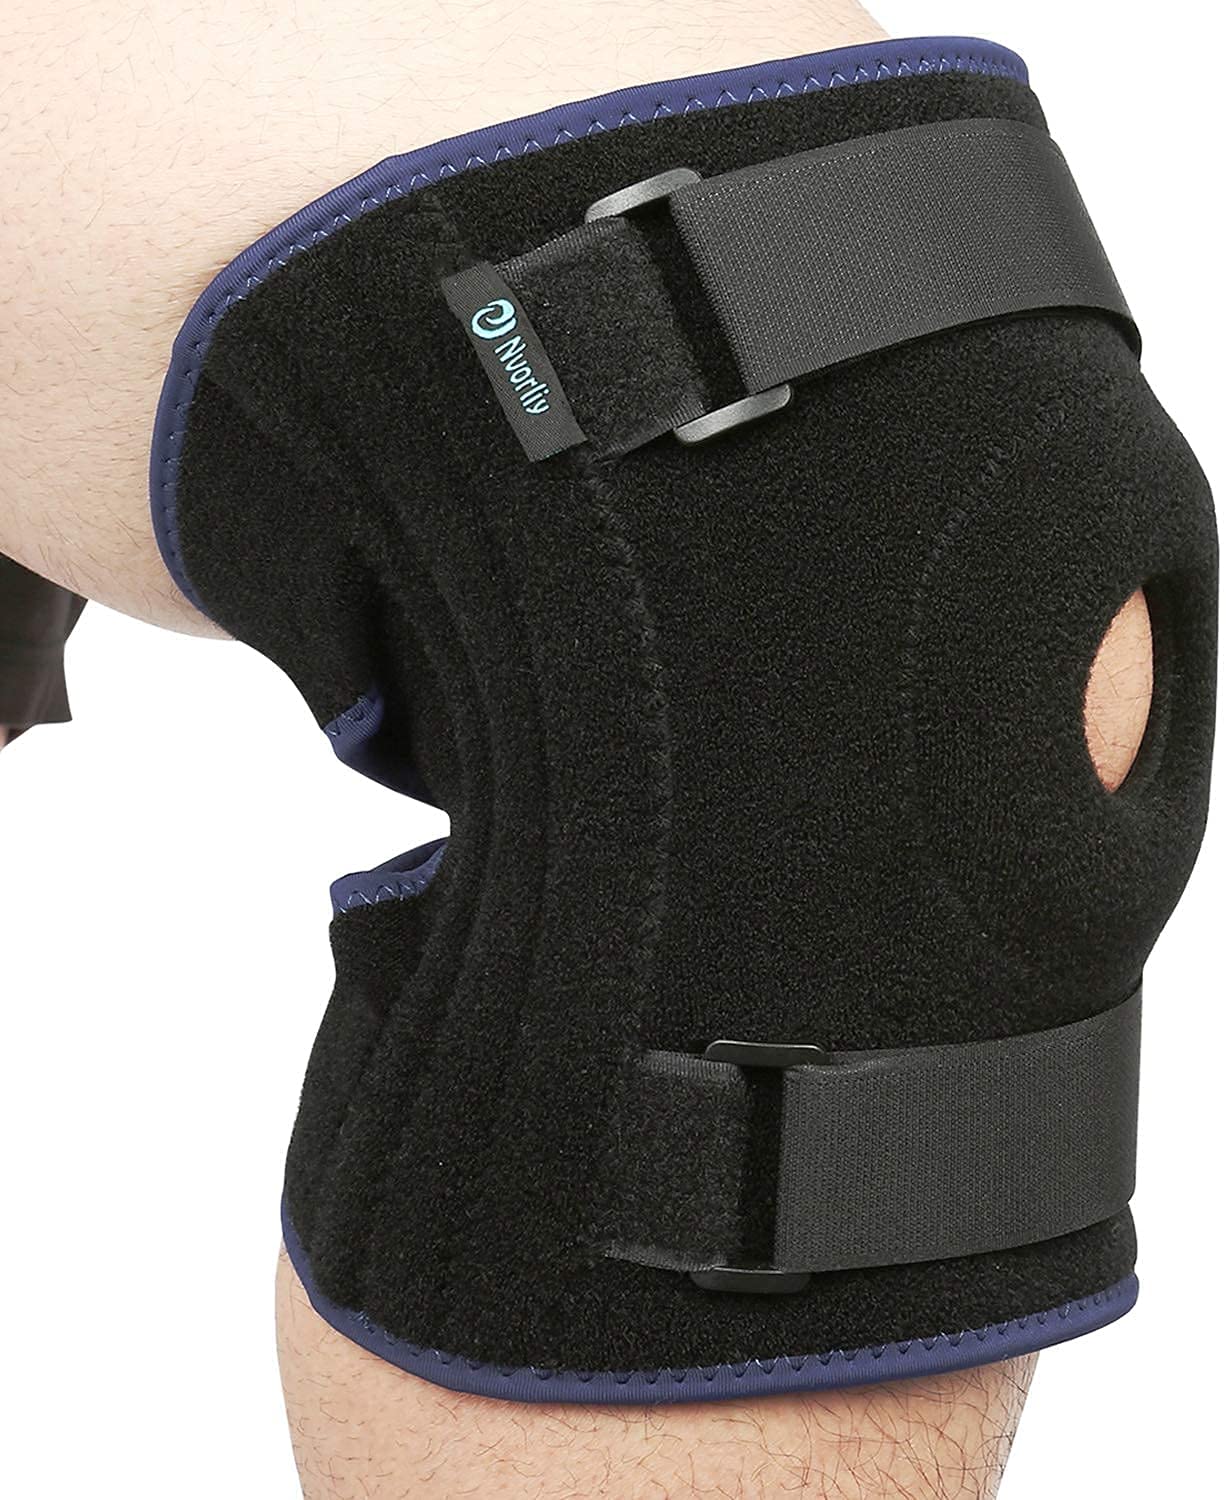 Nvorliy Plus Size Knee Braces for Knee Pain, Extra Large Adjustable Knee Support with Side Stabilizers for Arthritis Pain, Meniscus Tear, ACL, LCL, Injury Recovery & Pain Relief - Fit Women & Men